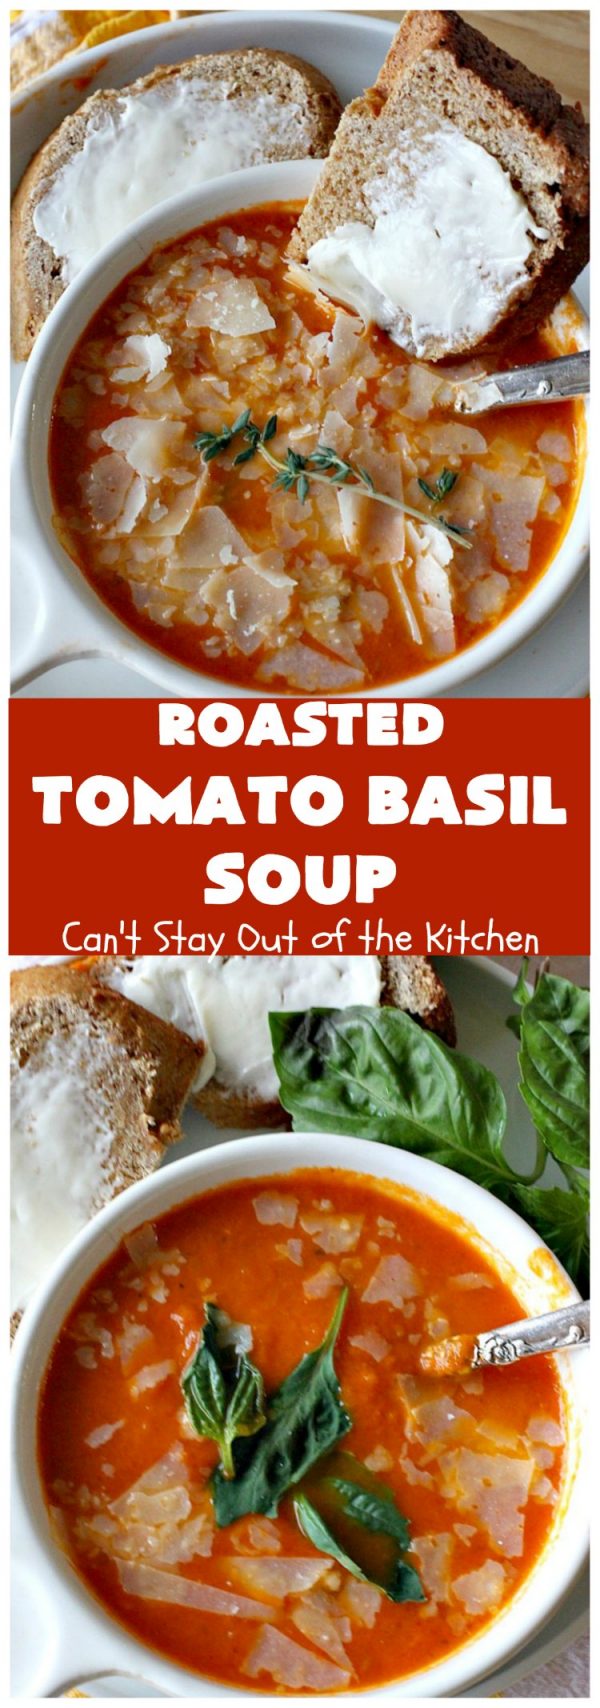 Roasted Tomato Basil Soup – Can't Stay Out of the Kitchen